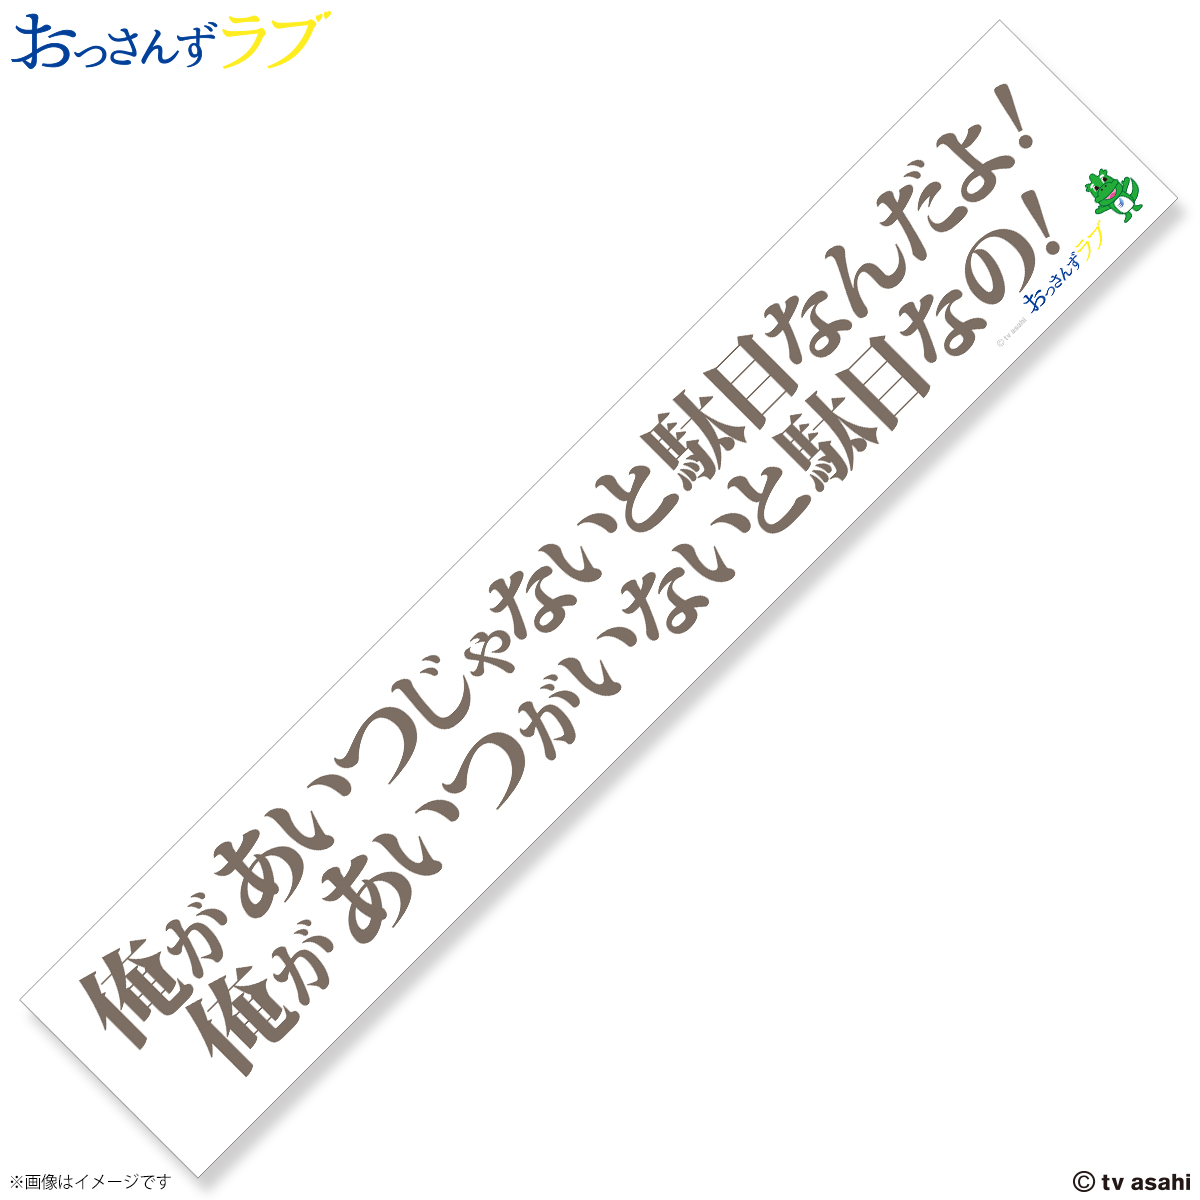 Ossan's Love Towel with words